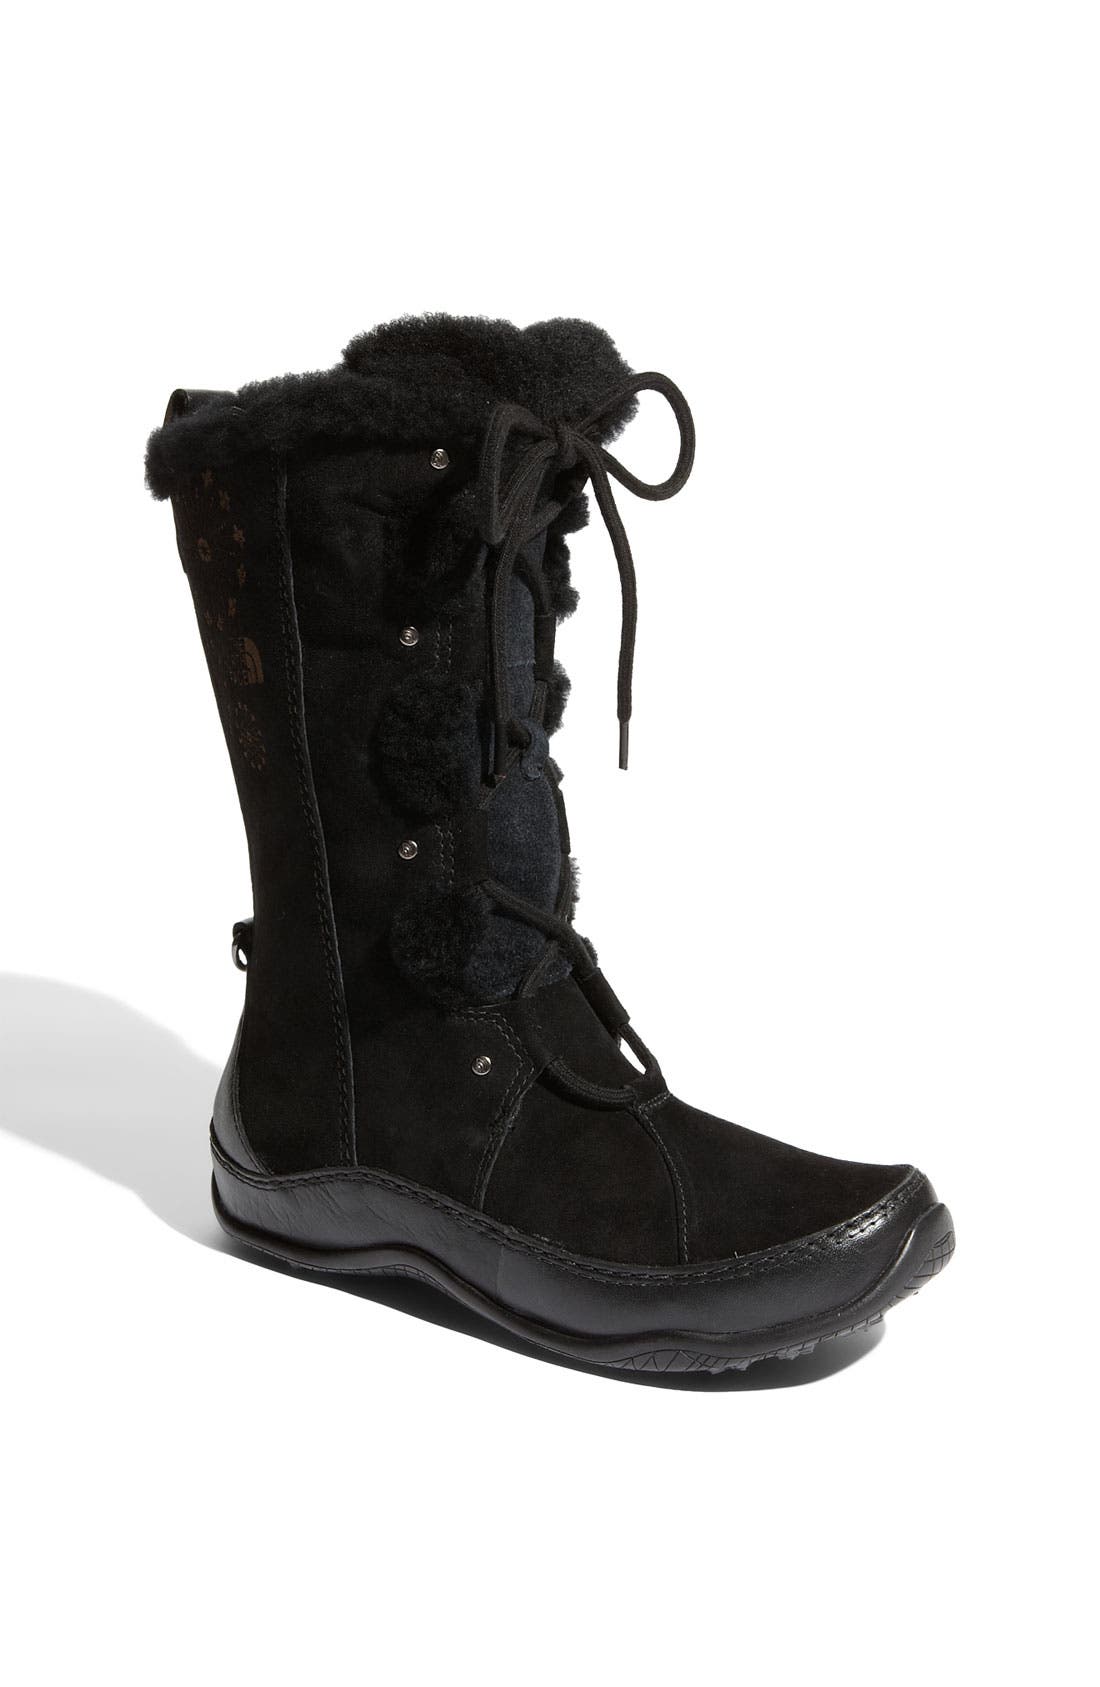 north face abby boots